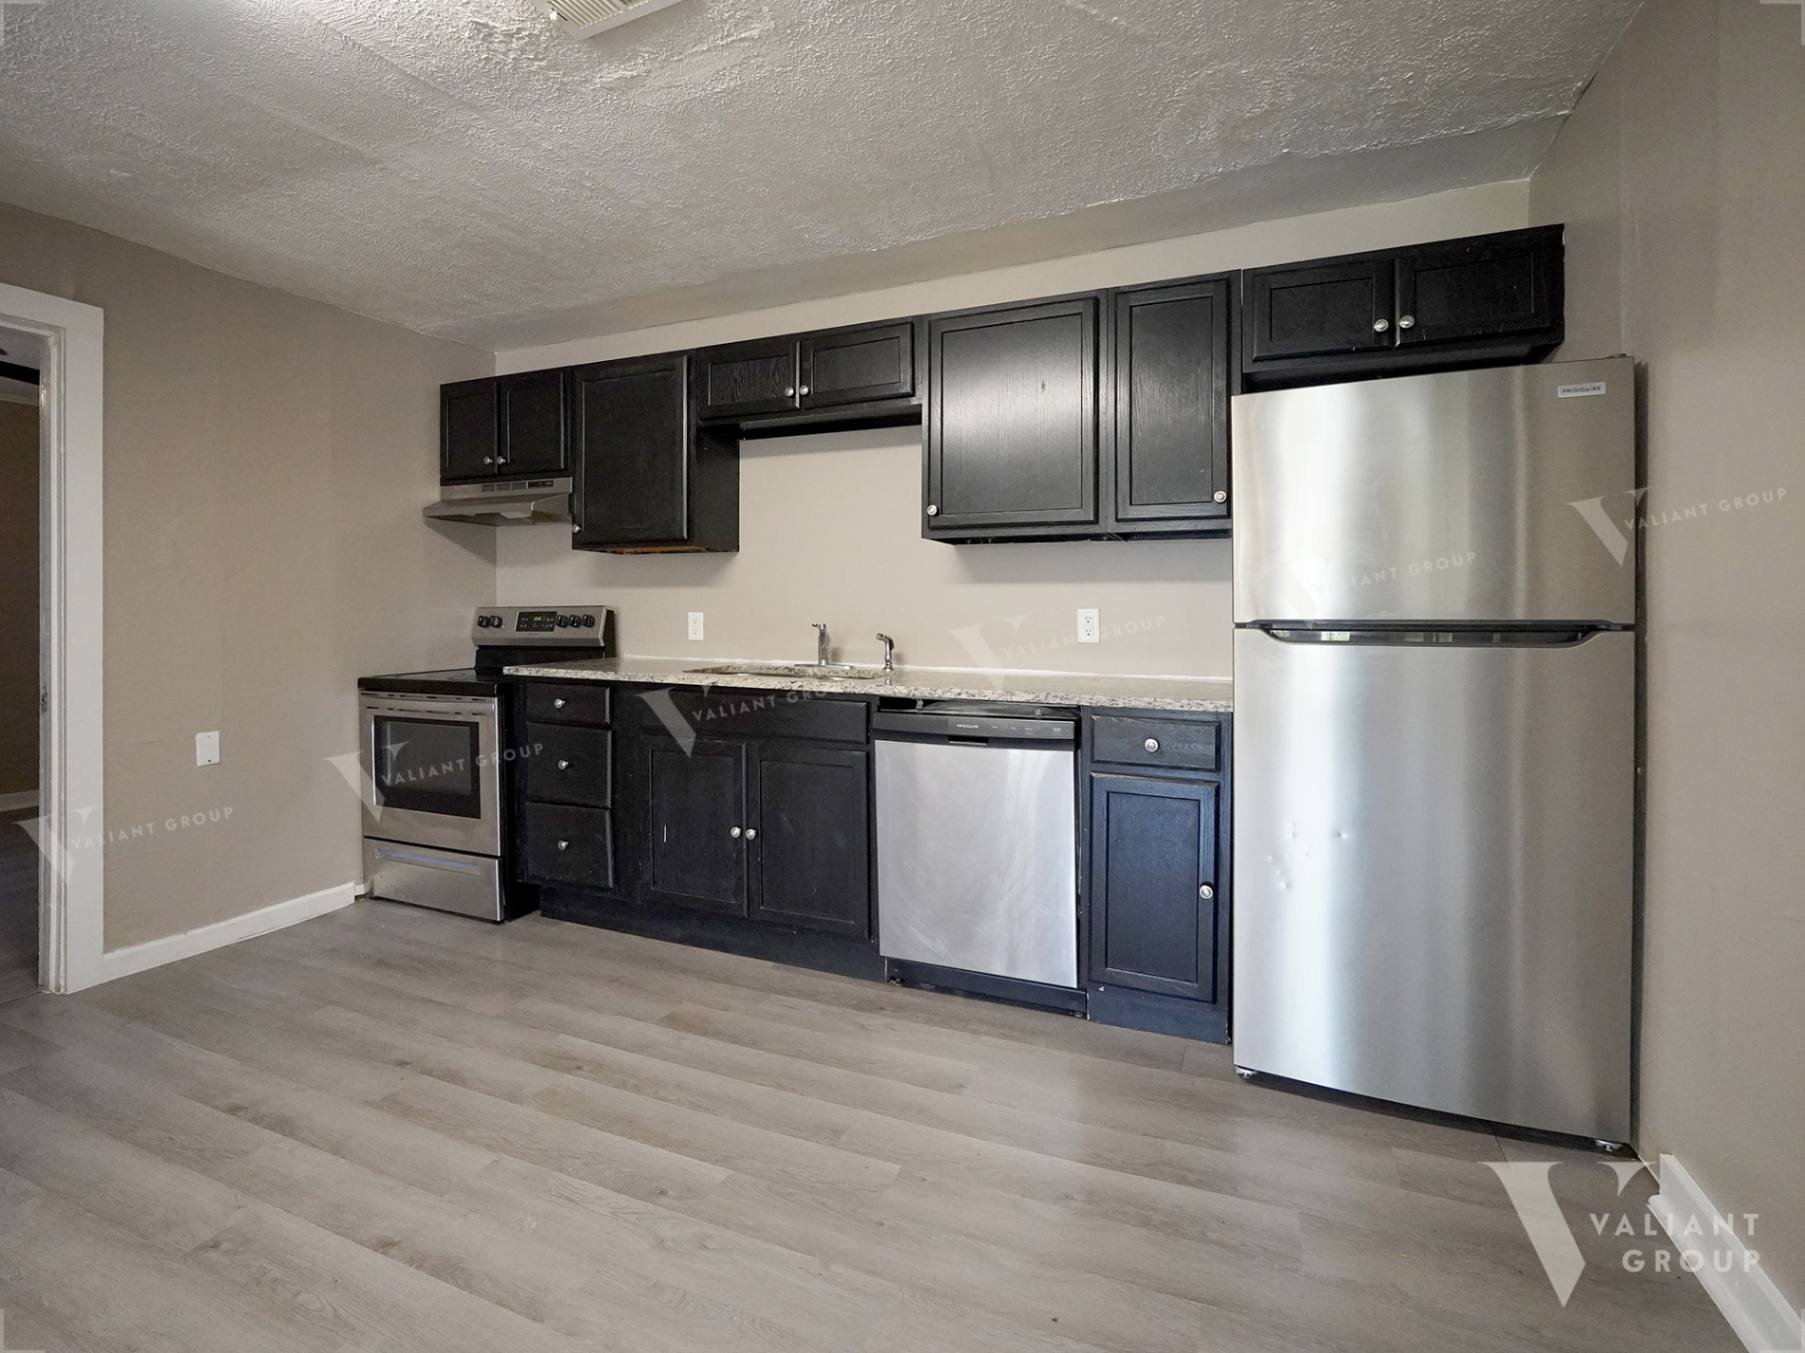 Rental-House-735-North-Brown-Ave-Springfield-MO-04-Kitchen.jpg